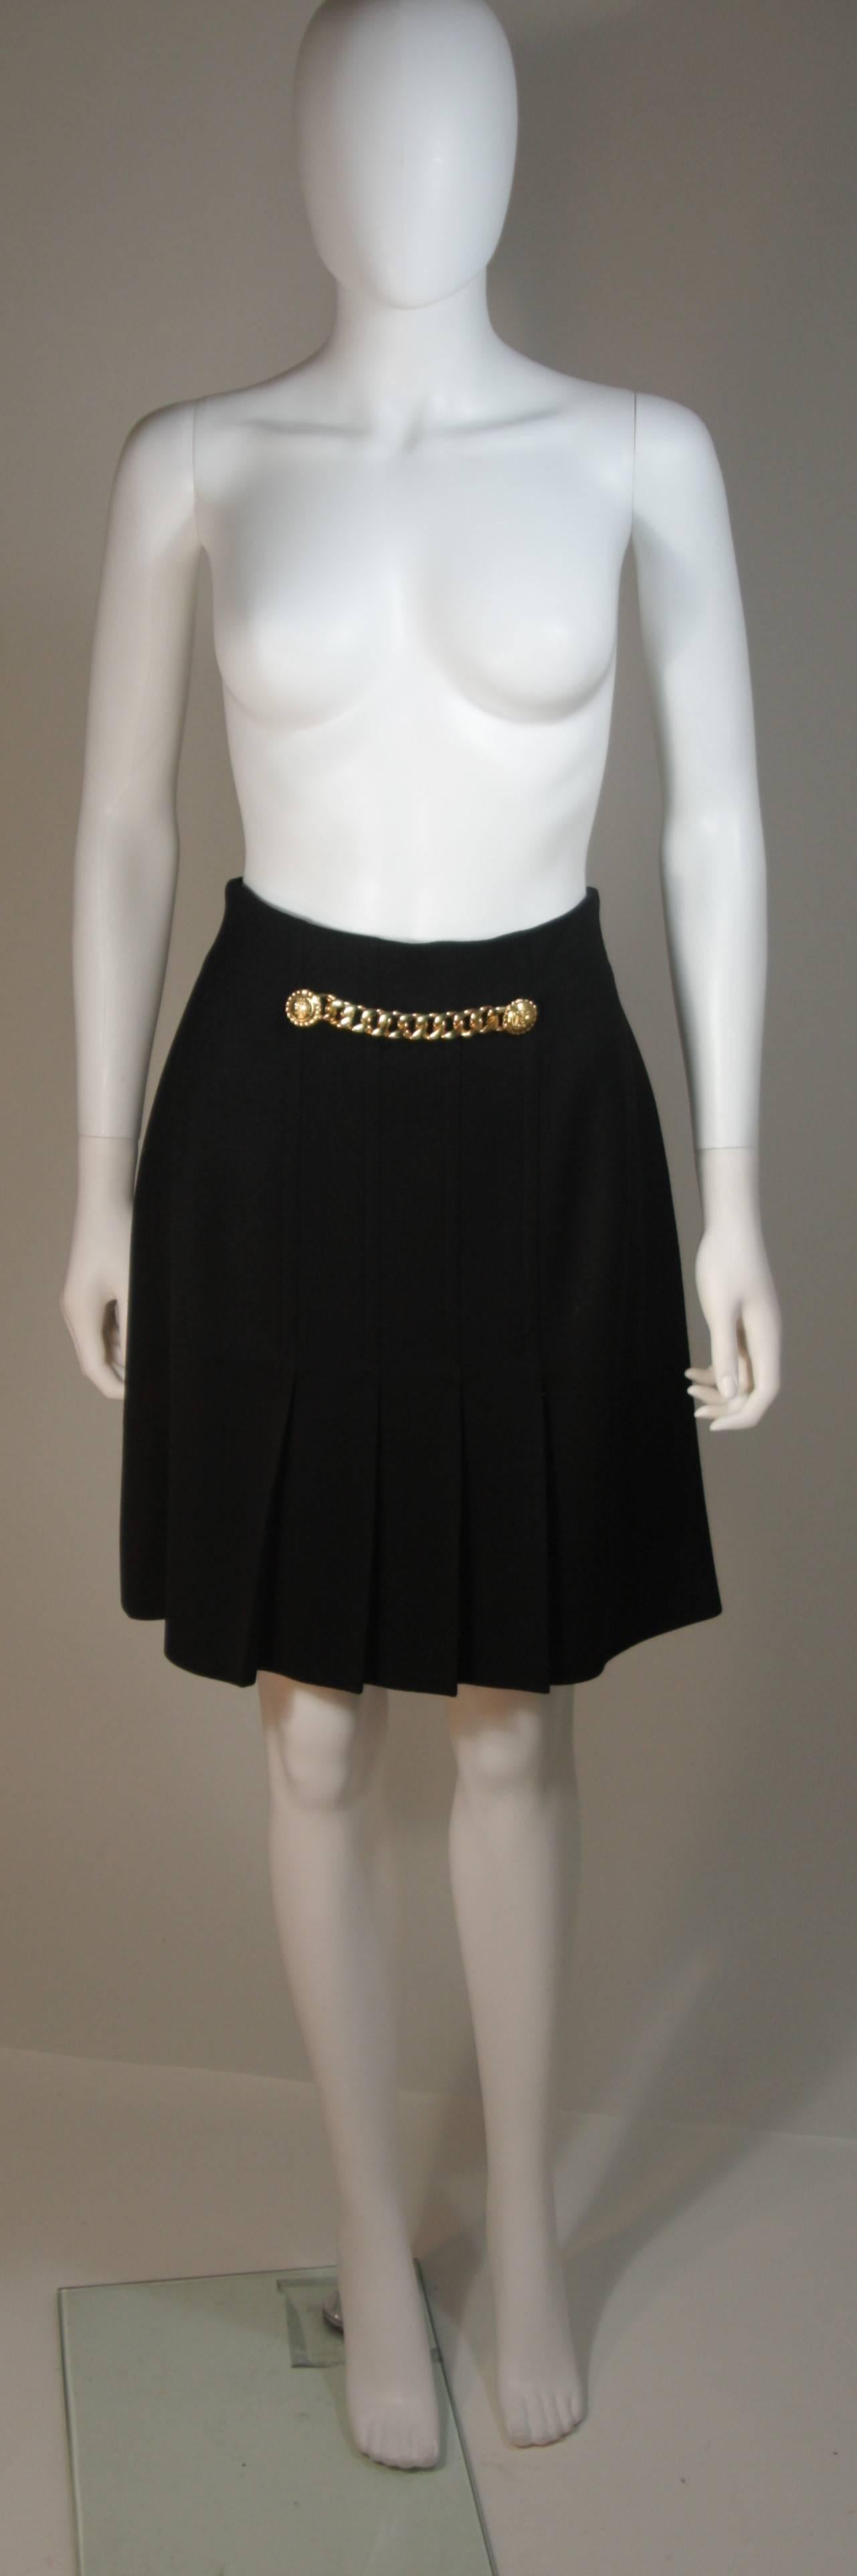 This Celine skirt is composed of a beautifully crafted black wool. The skirt features front pleats and a gold chain detail, There is a center back zipper closure. In excellent condition. Made in France.

  **Please cross-reference measurements for